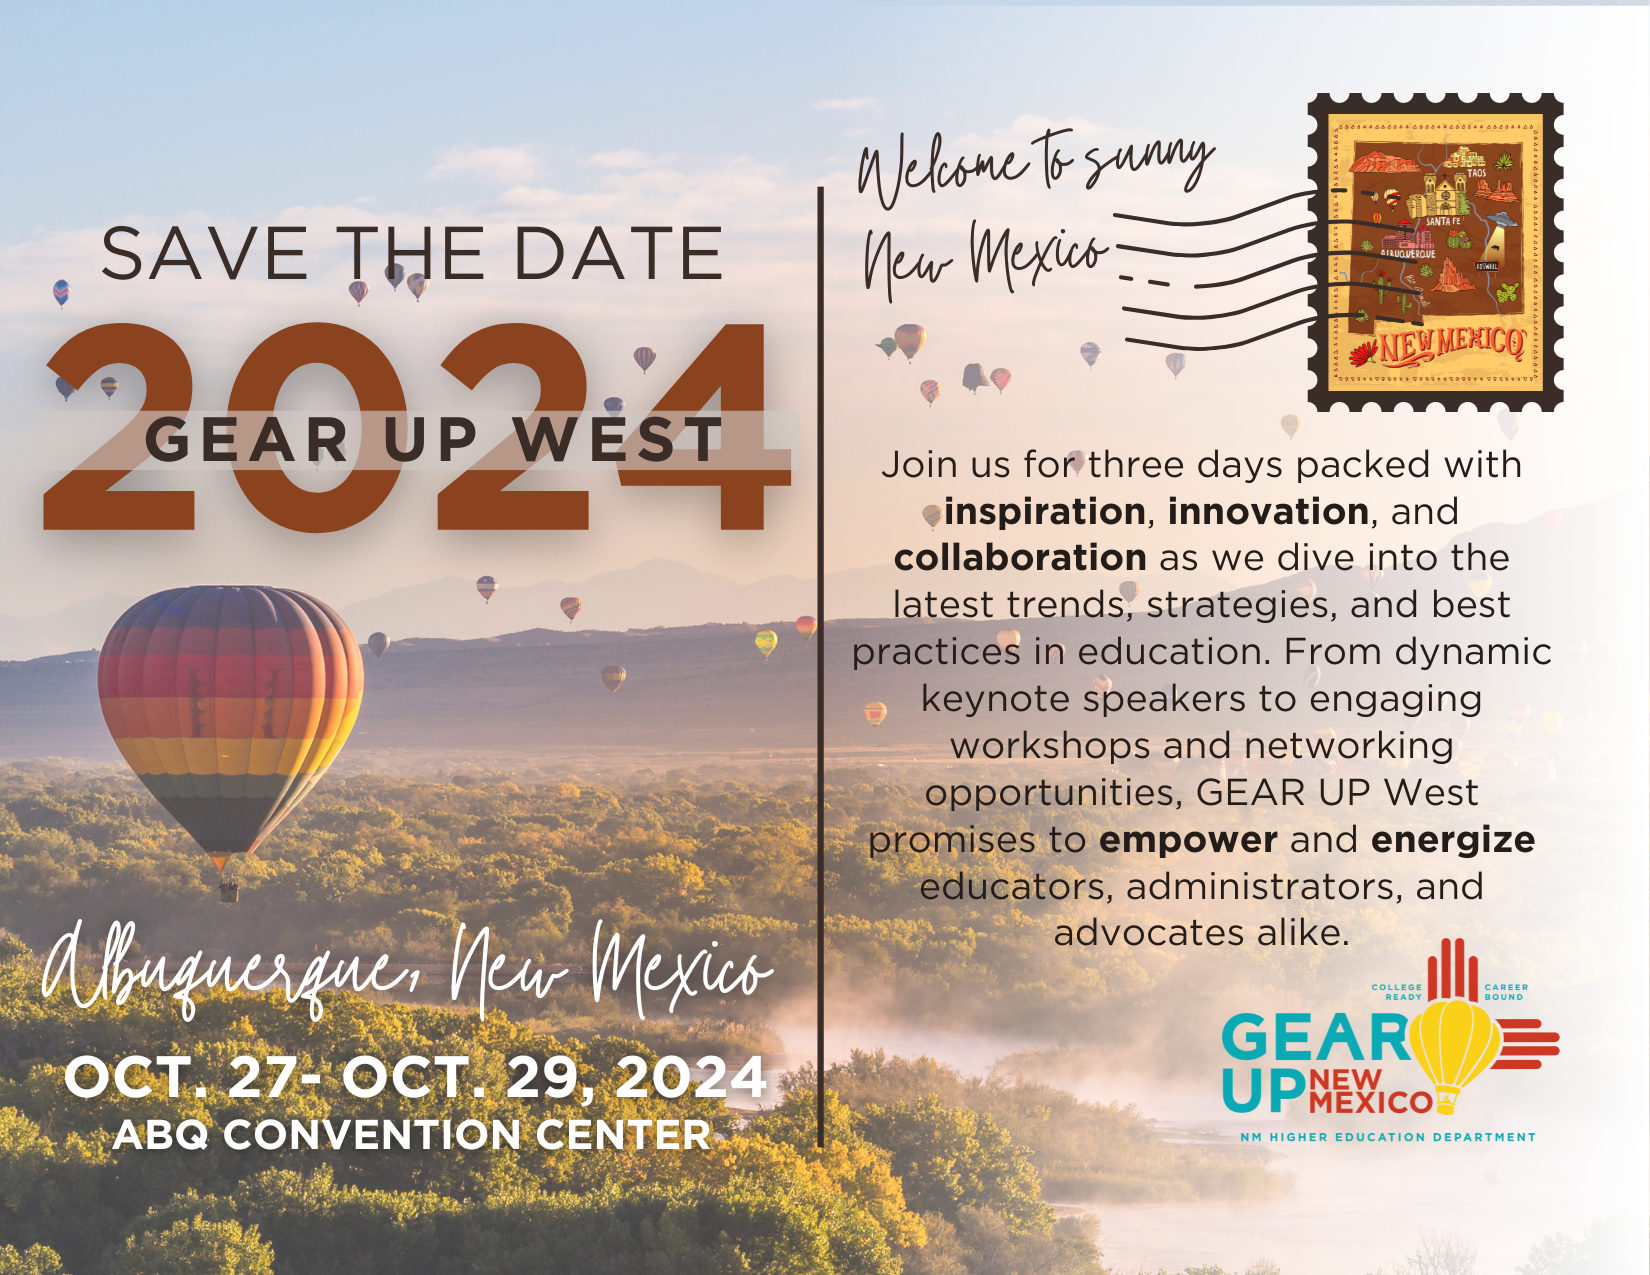 Conference dates are October 27 – 29 at the Albuquerque Convention Center. Conference lodging will be provided at the Clyde and Double Tree (connected to the conference center) and the Hotel Albuquerque as our overflow hotel (the city of Albuquerque offers in-kind shuttle service).